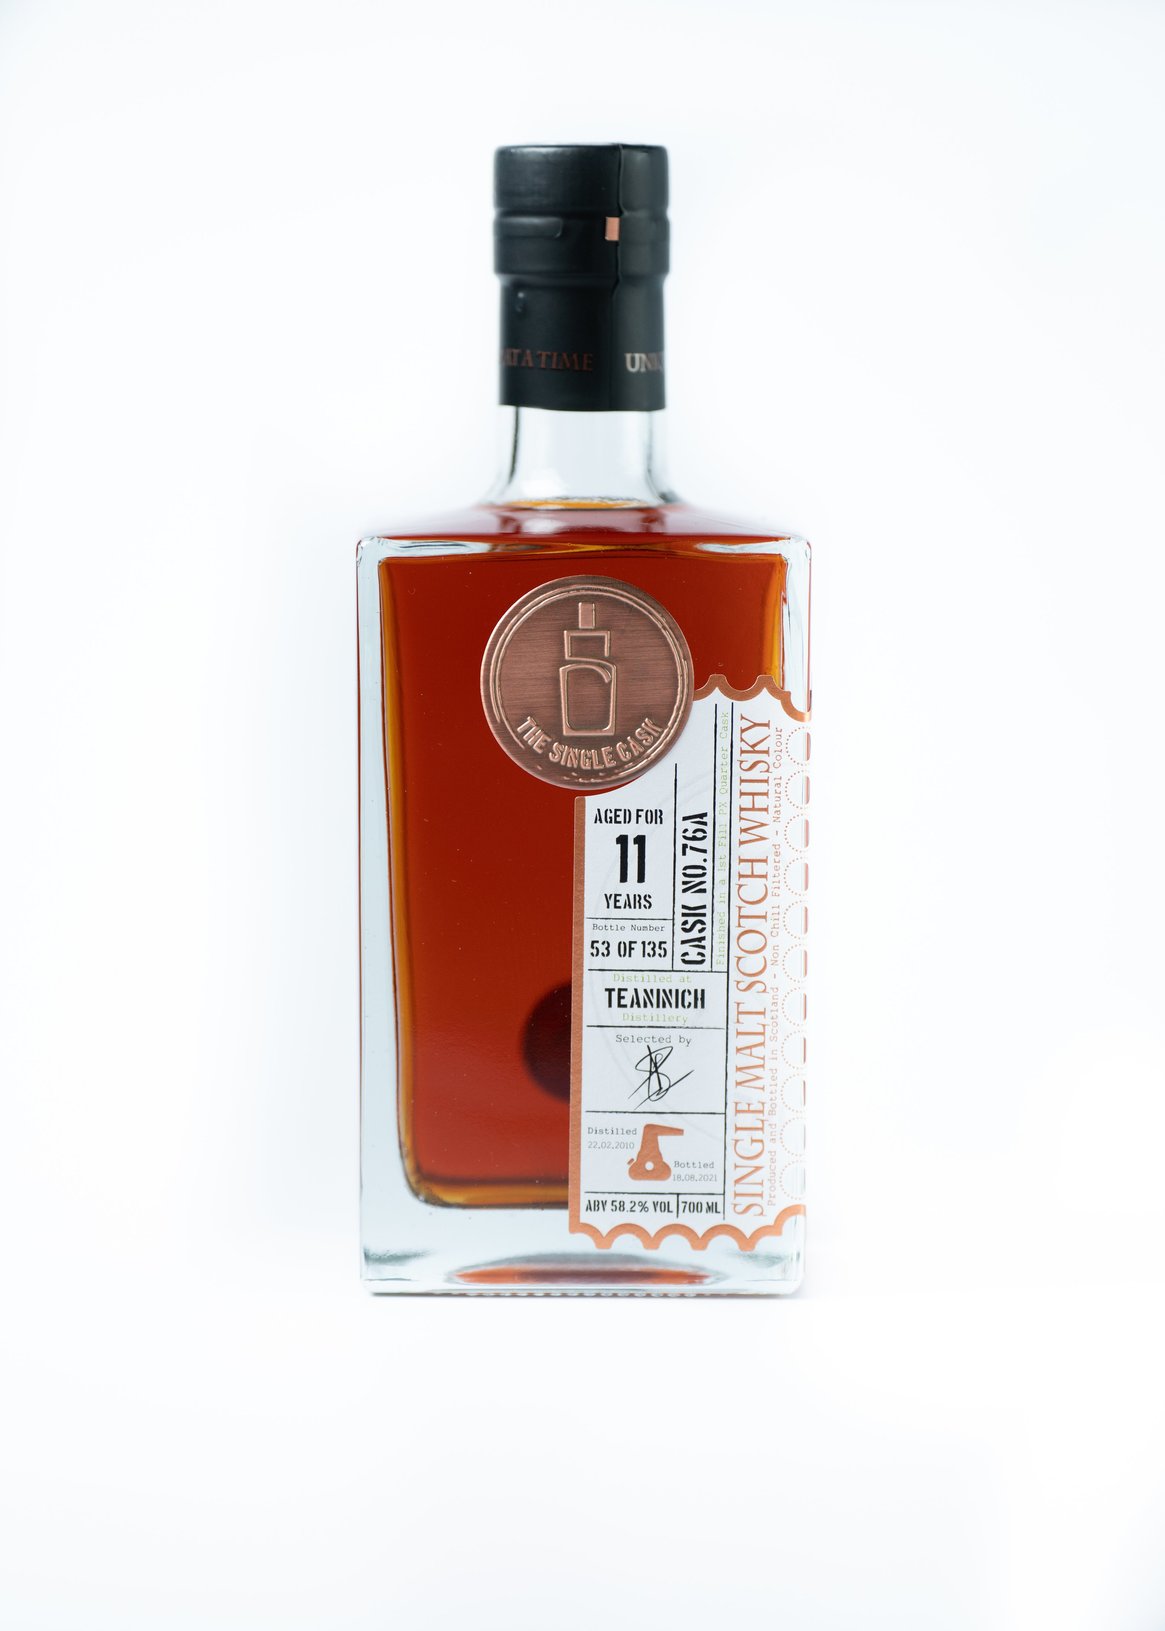 11 years old Teaninich scotch whisky by The Single Cask  Edit alt text